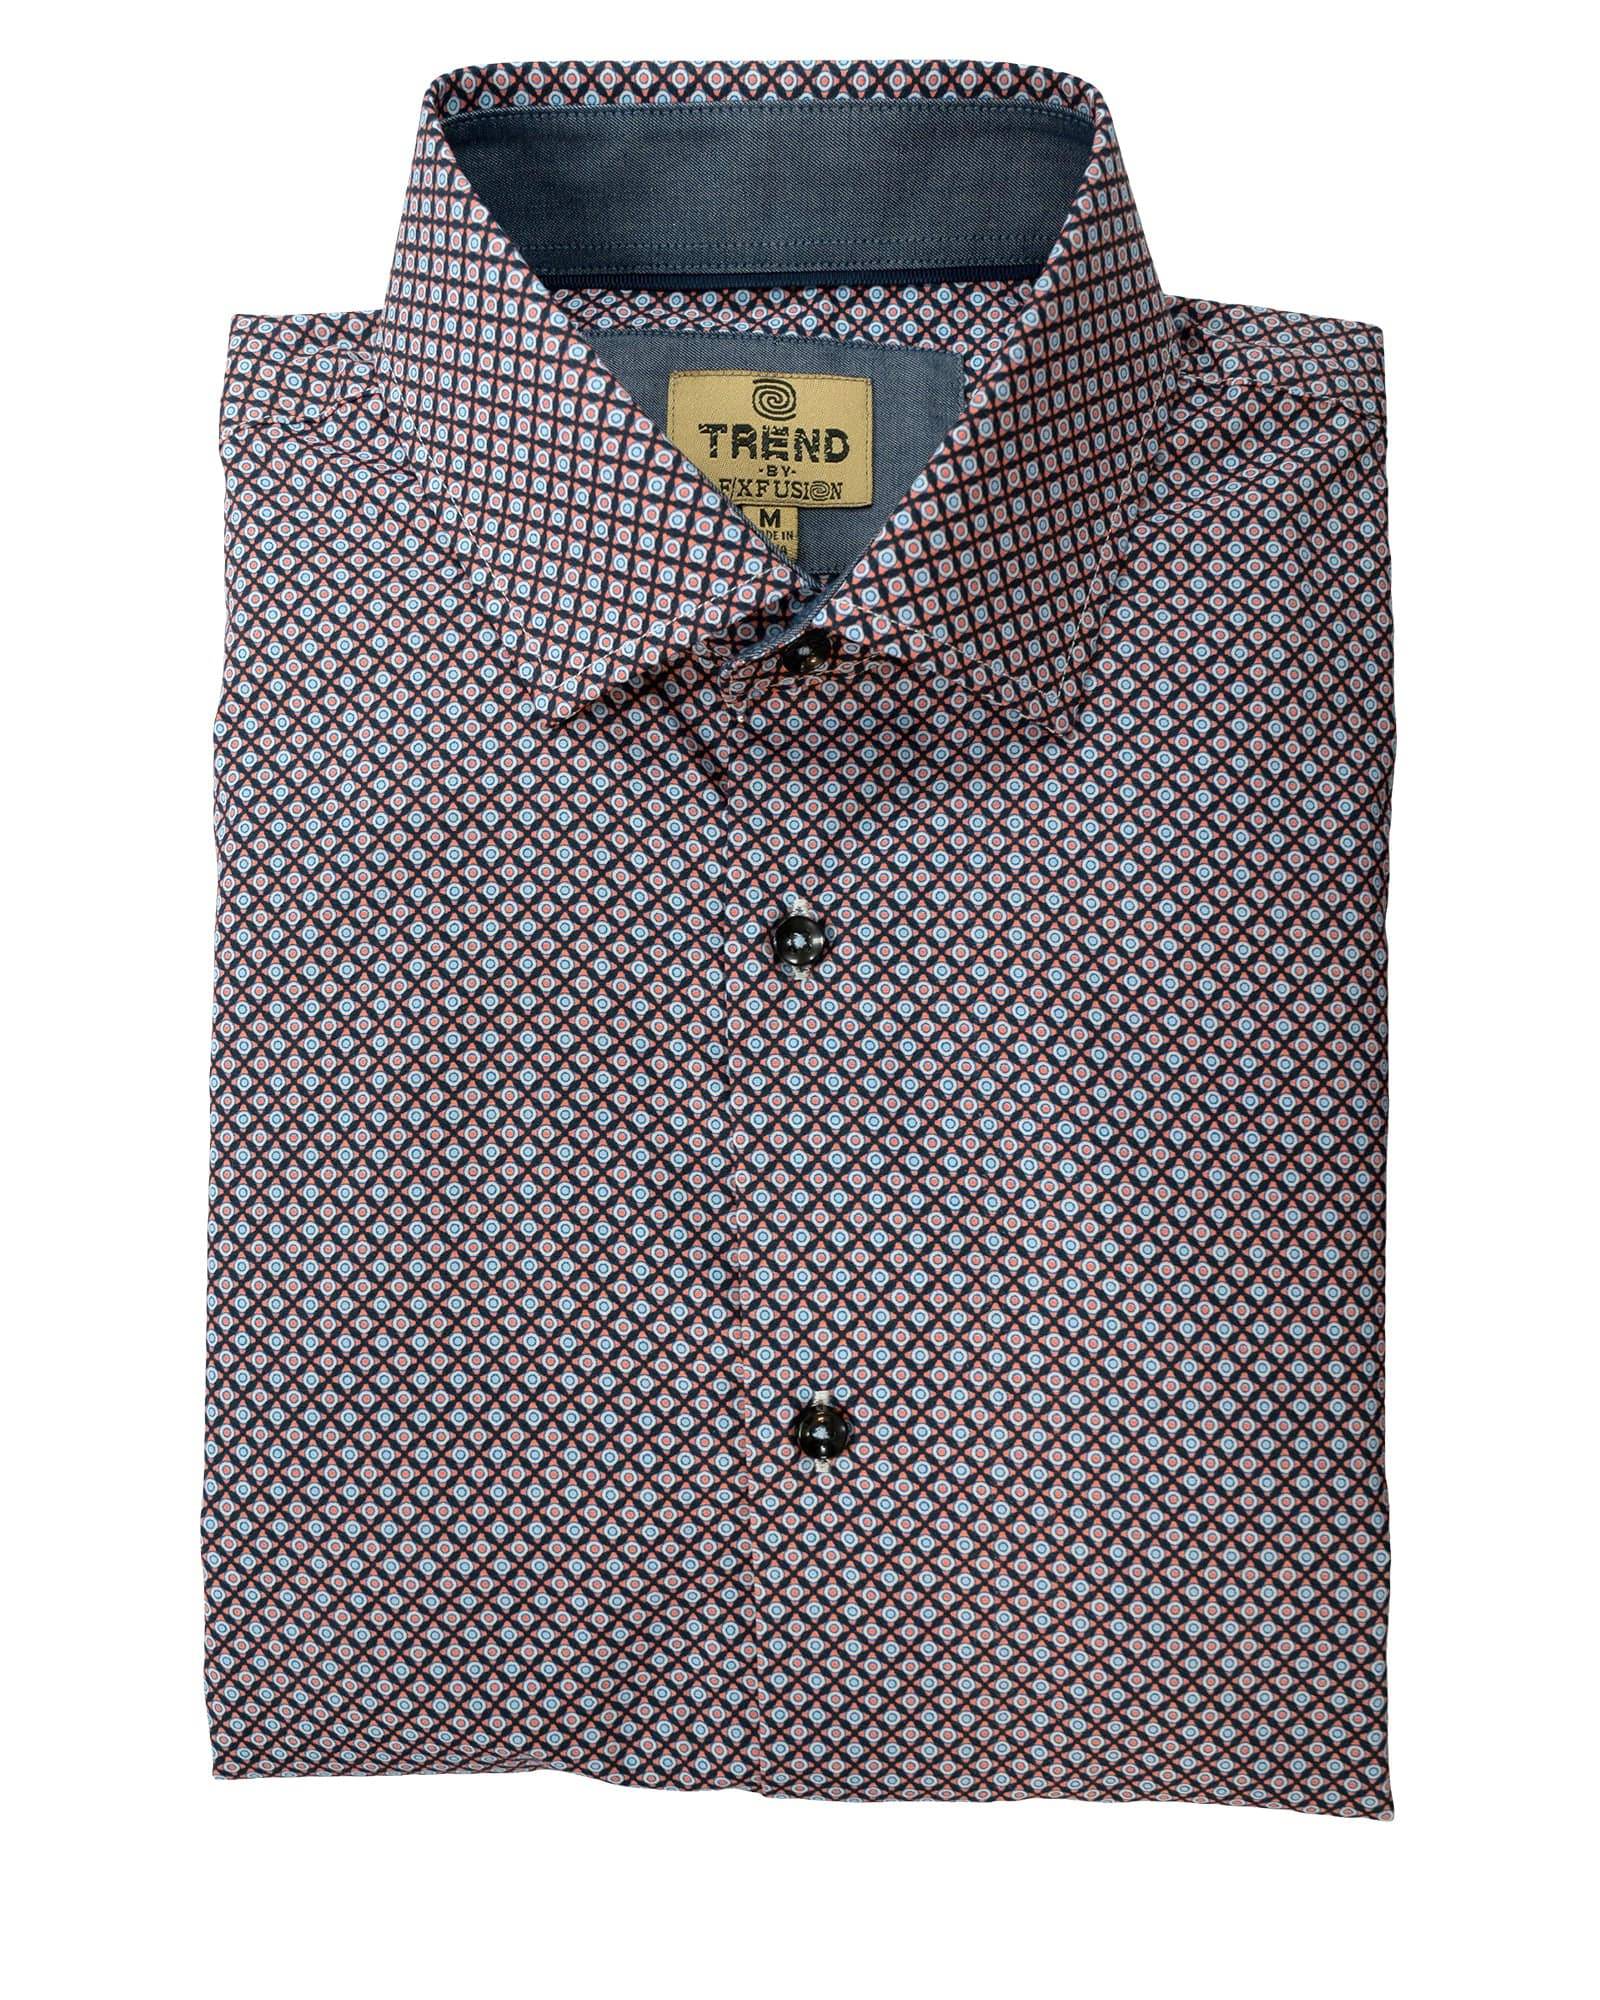 Trend by F/X Fusion Coral and Navy Circle Print Sport Shirt - Rainwater's Men's Clothing and Tuxedo Rental